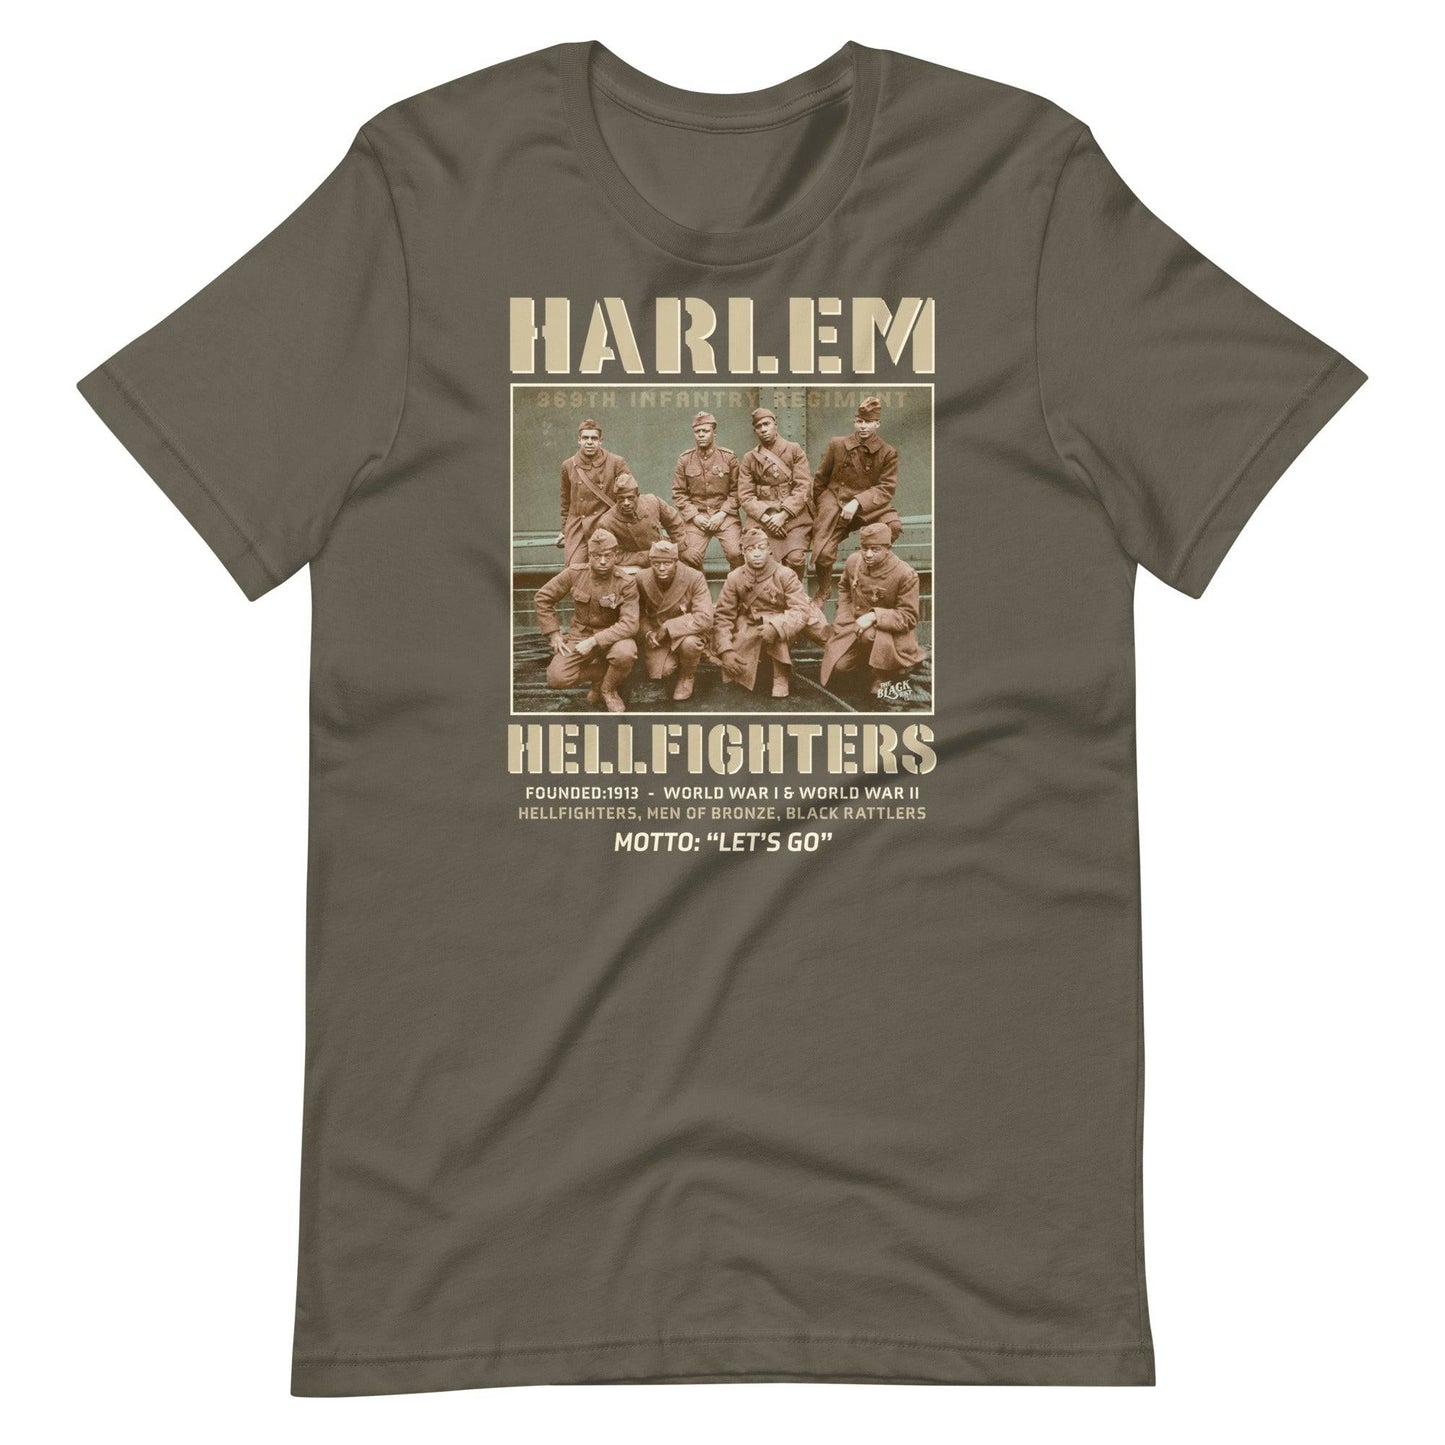 army green t shirt with an image of the harlem hellfighters graphic design